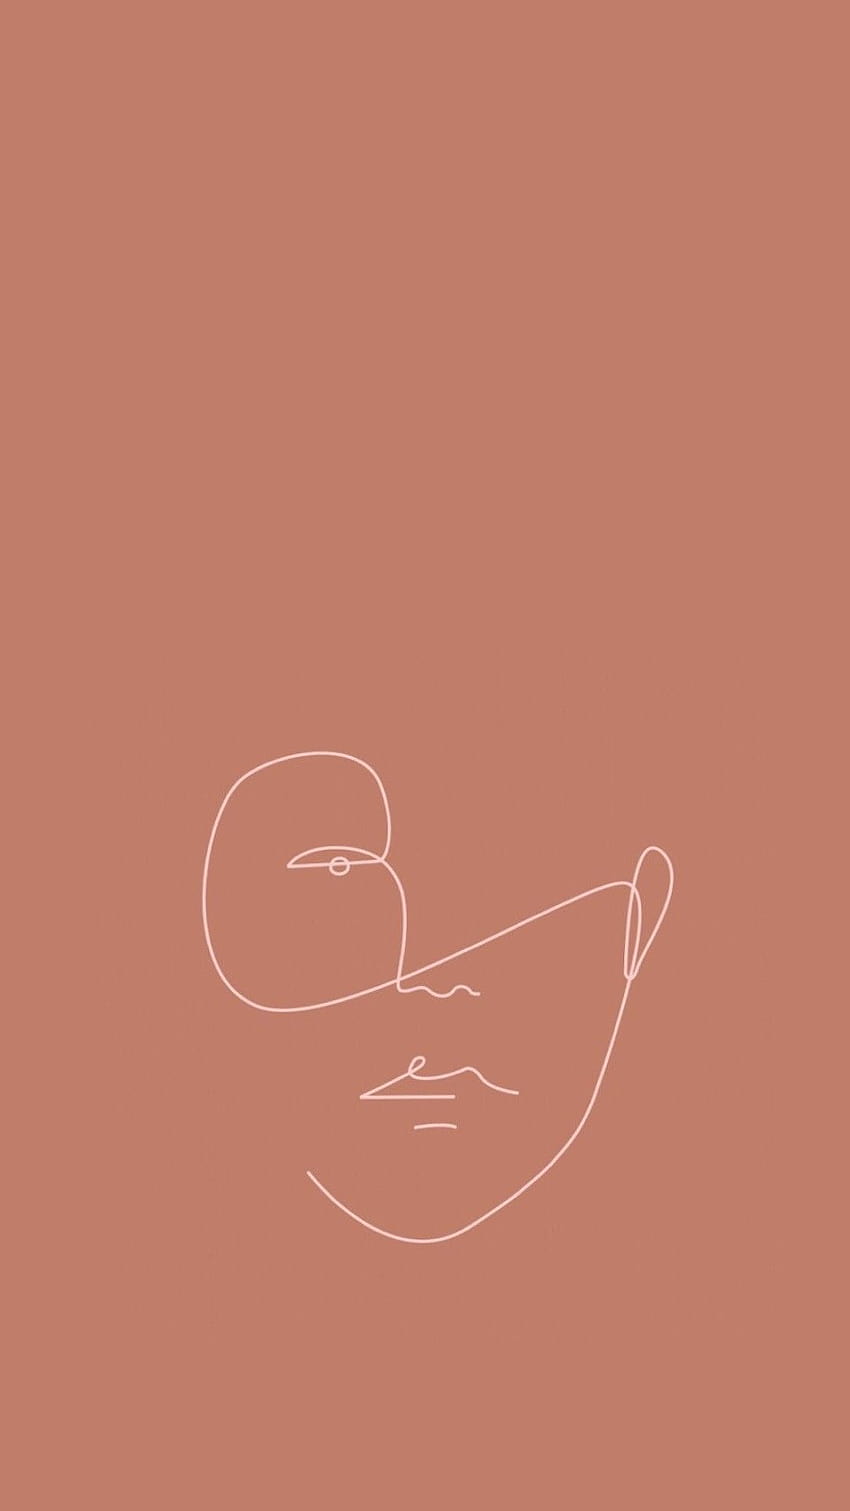 Minimalist line art of a woman's face against a pink background - Pastel minimalist